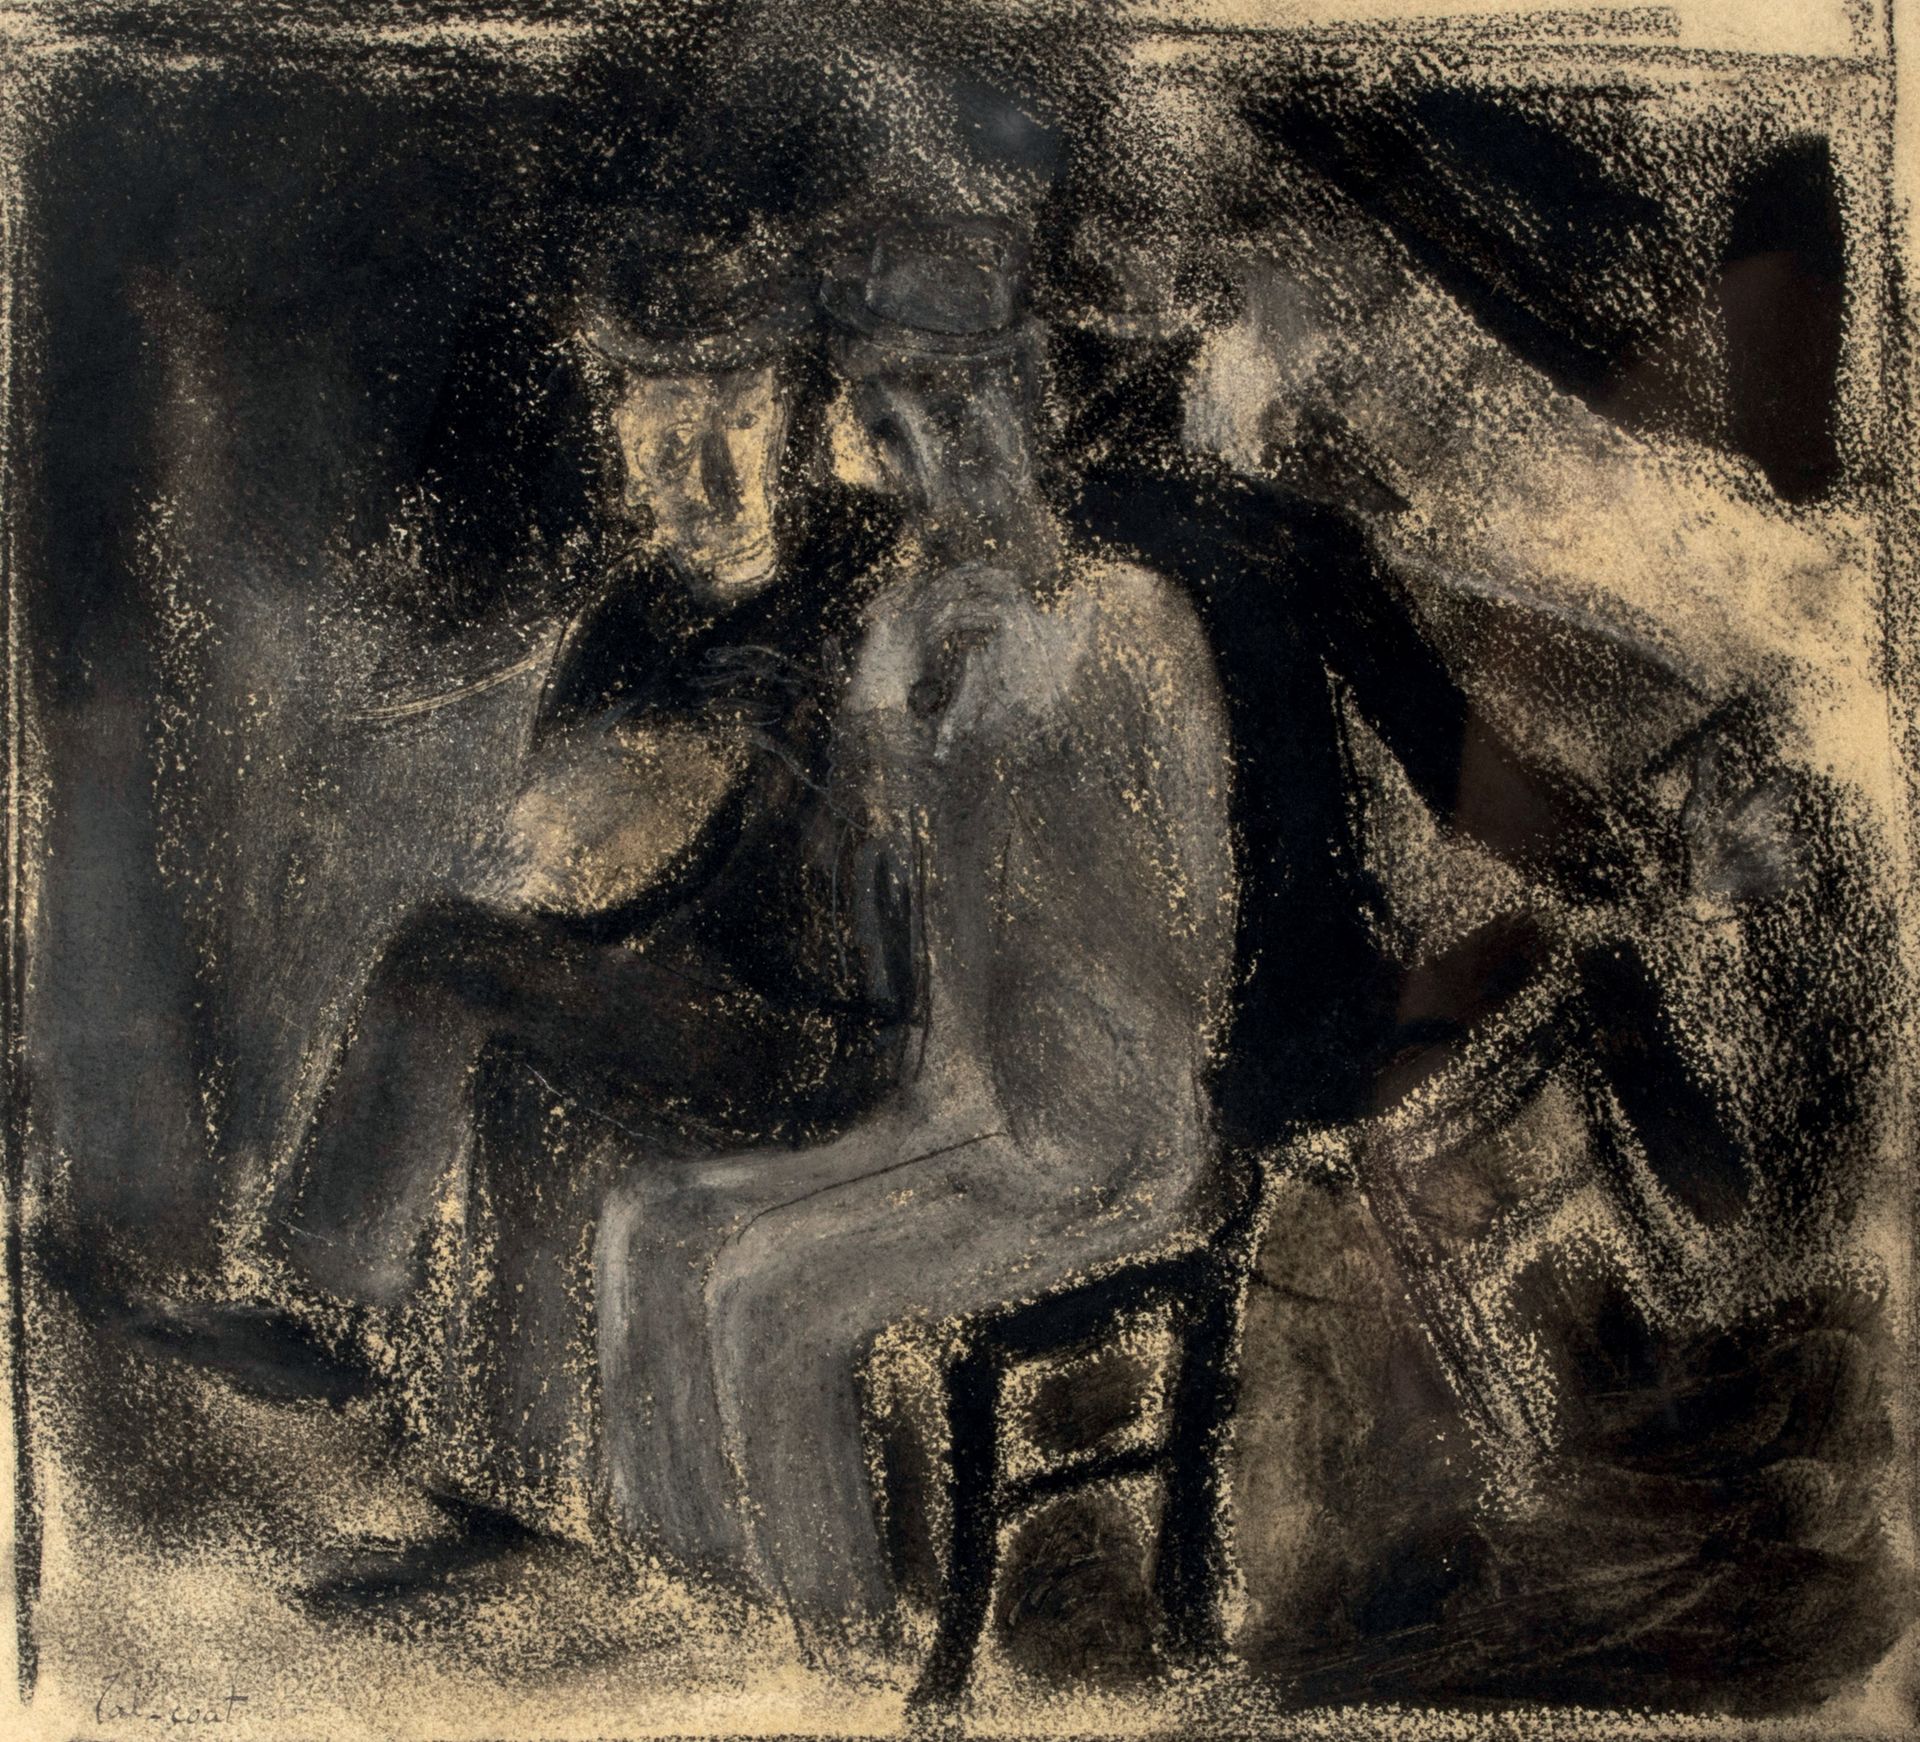 PIERRE TAL COAT (1905-1985) Seated figures, circa 1927
Charcoal and gouache on p&hellip;